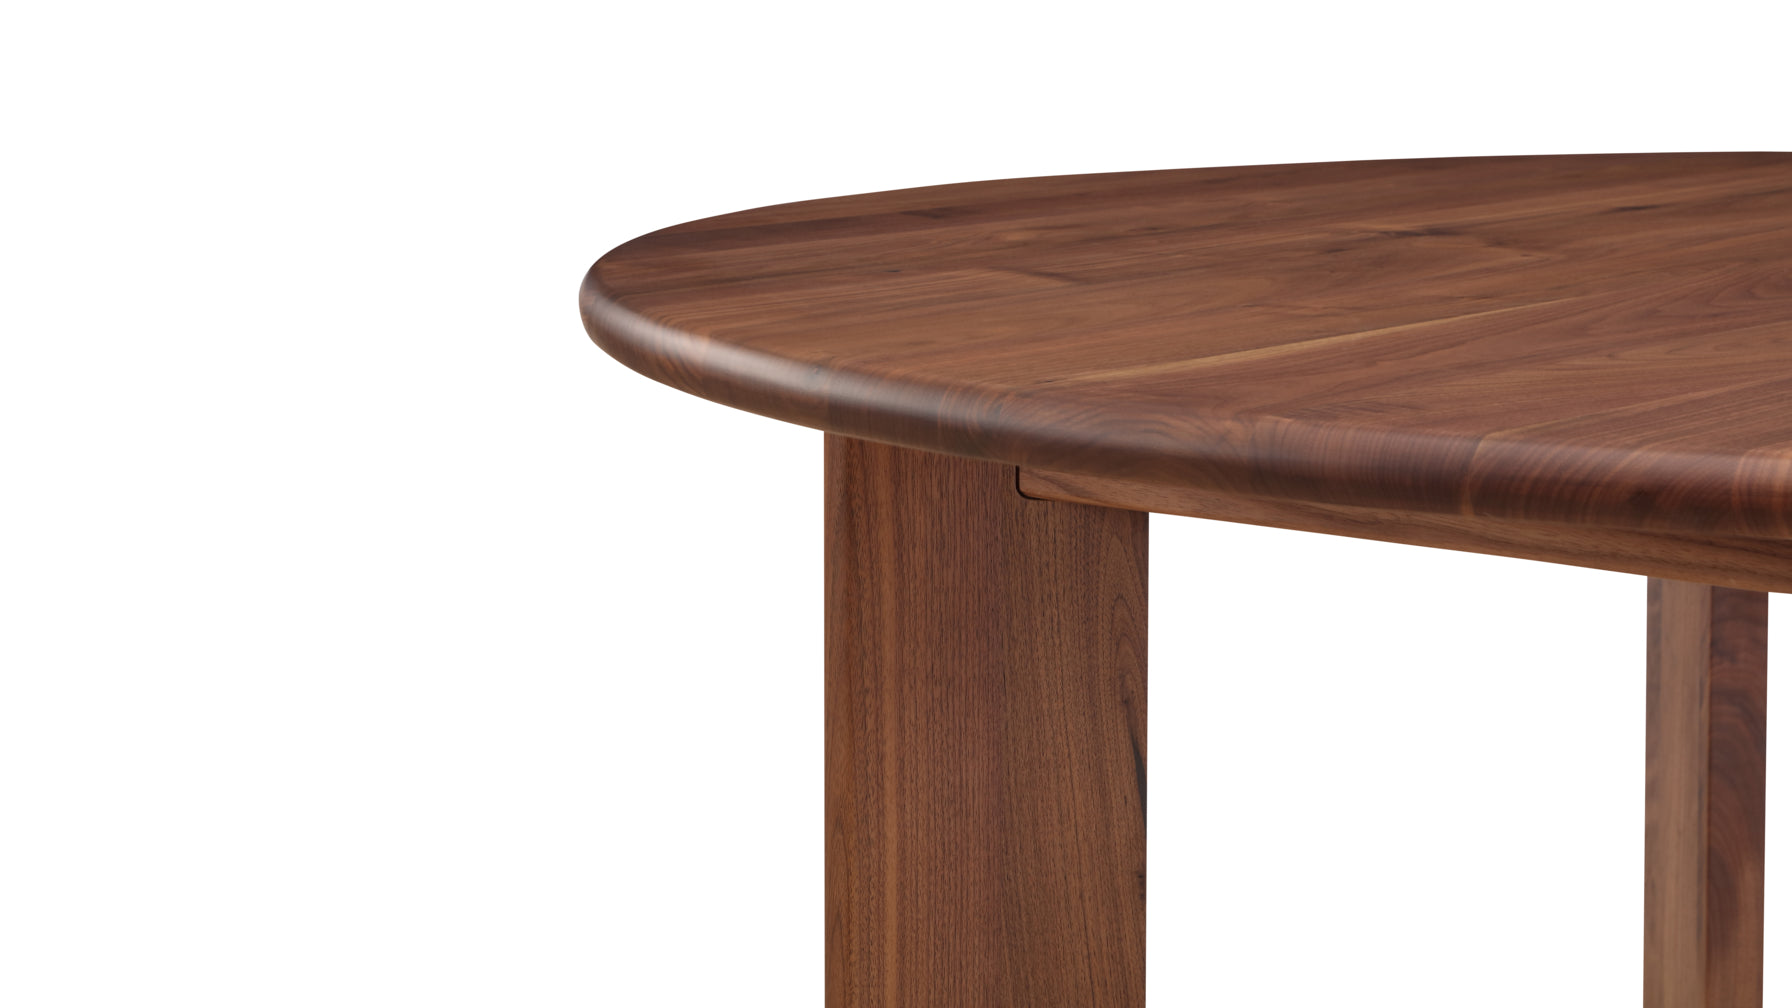 Frame Round Dining Table, Seats 4-5 People, Walnut - Image 8